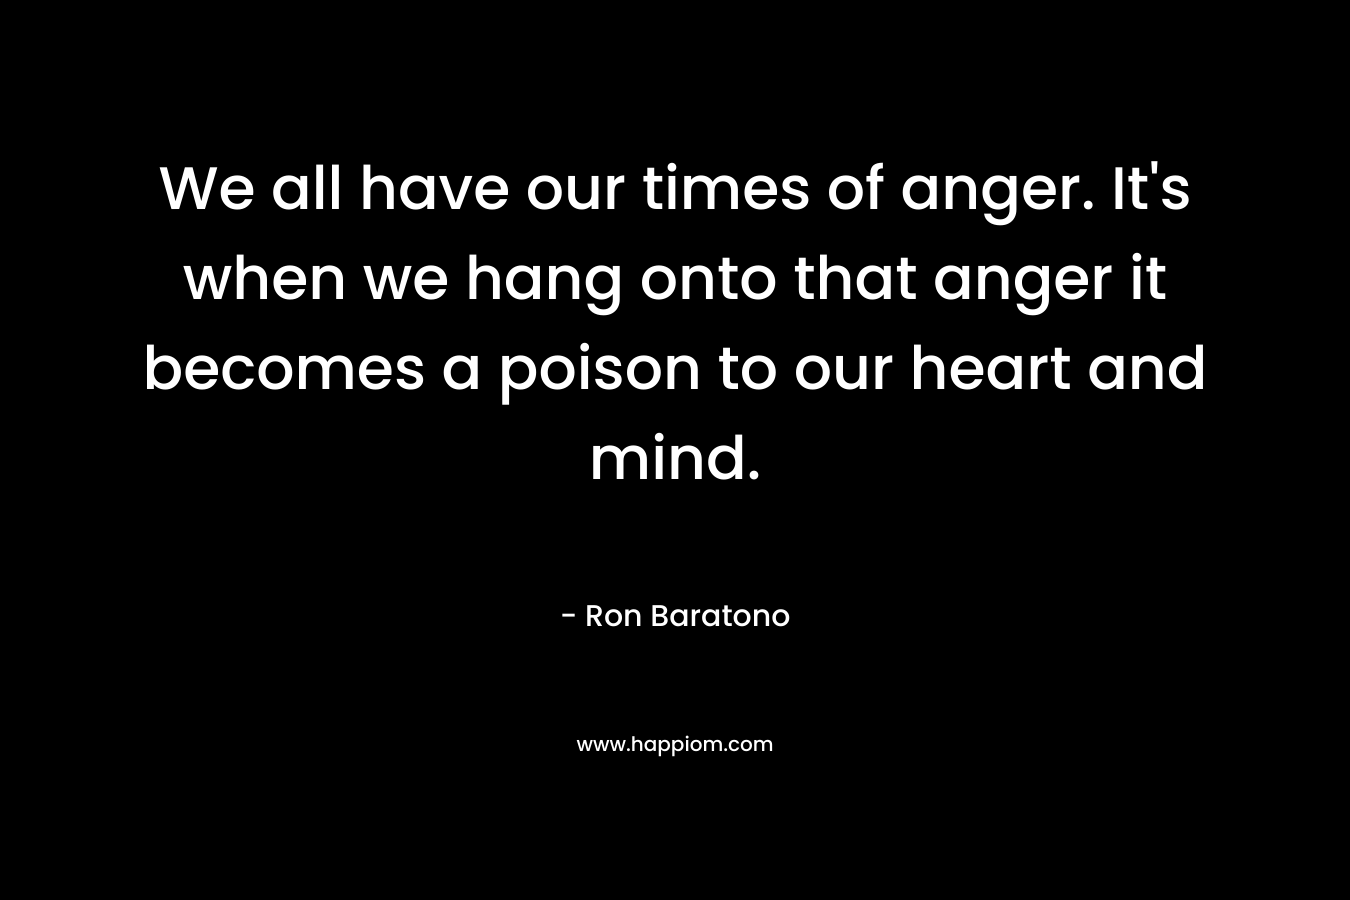 We all have our times of anger. It’s when we hang onto that anger it becomes a poison to our heart and mind. – Ron Baratono